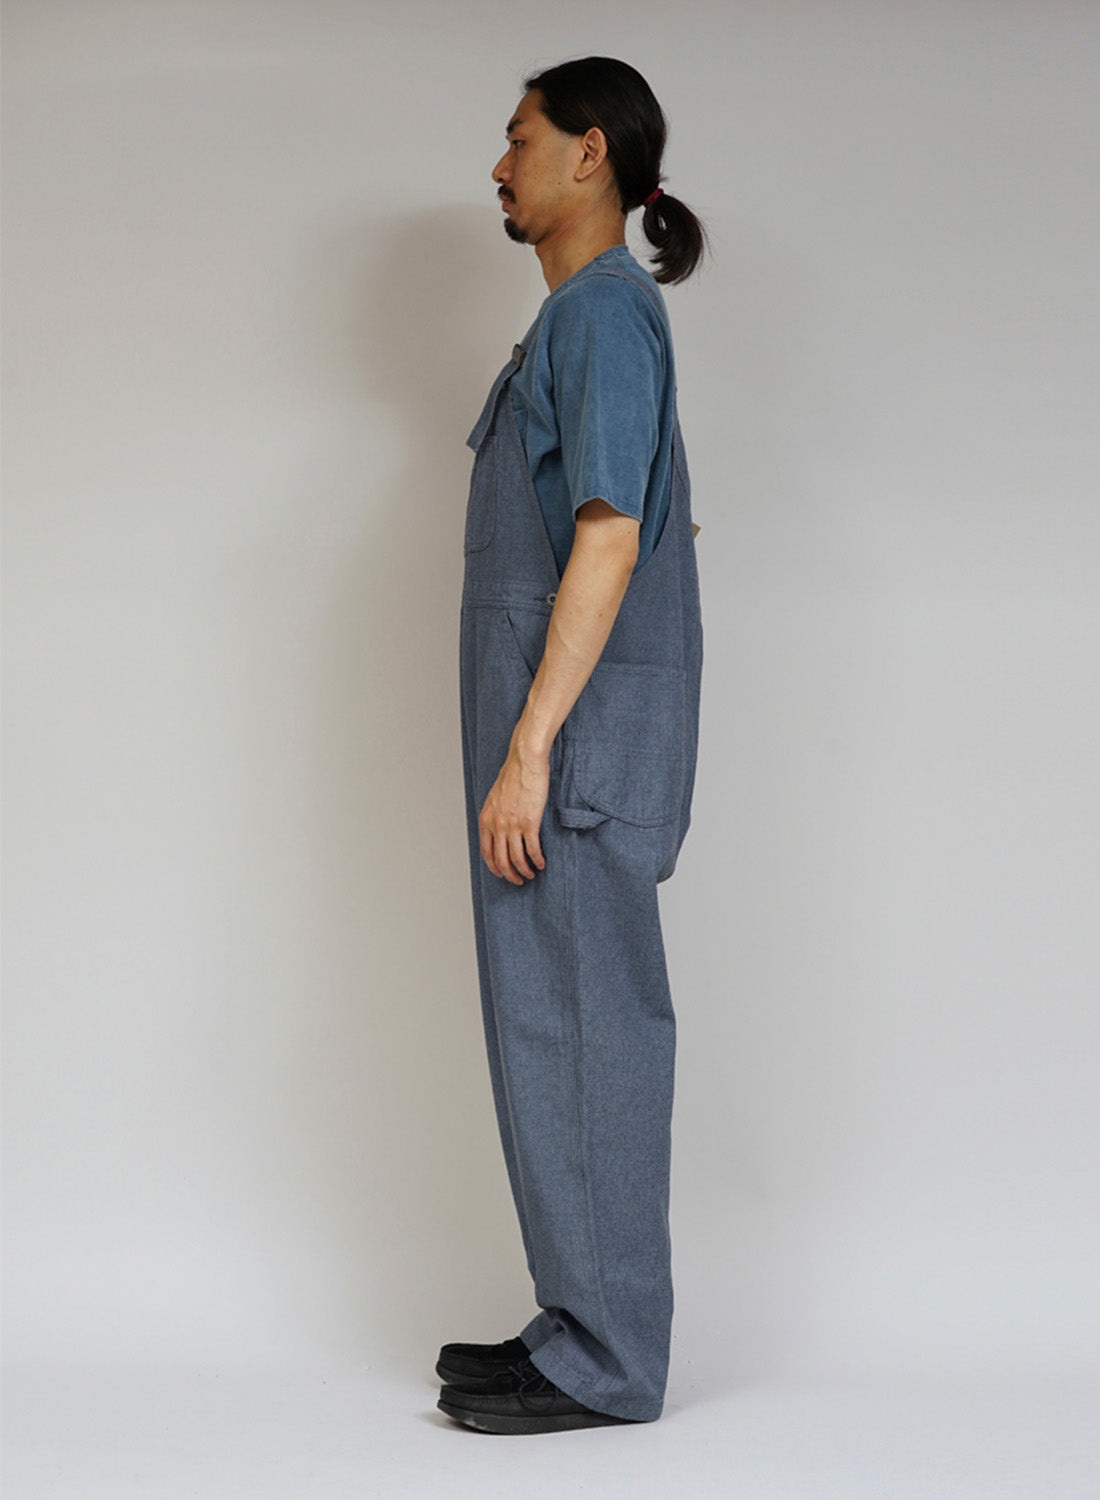 New Dungaree Broken Twill in Washed Blue - 3